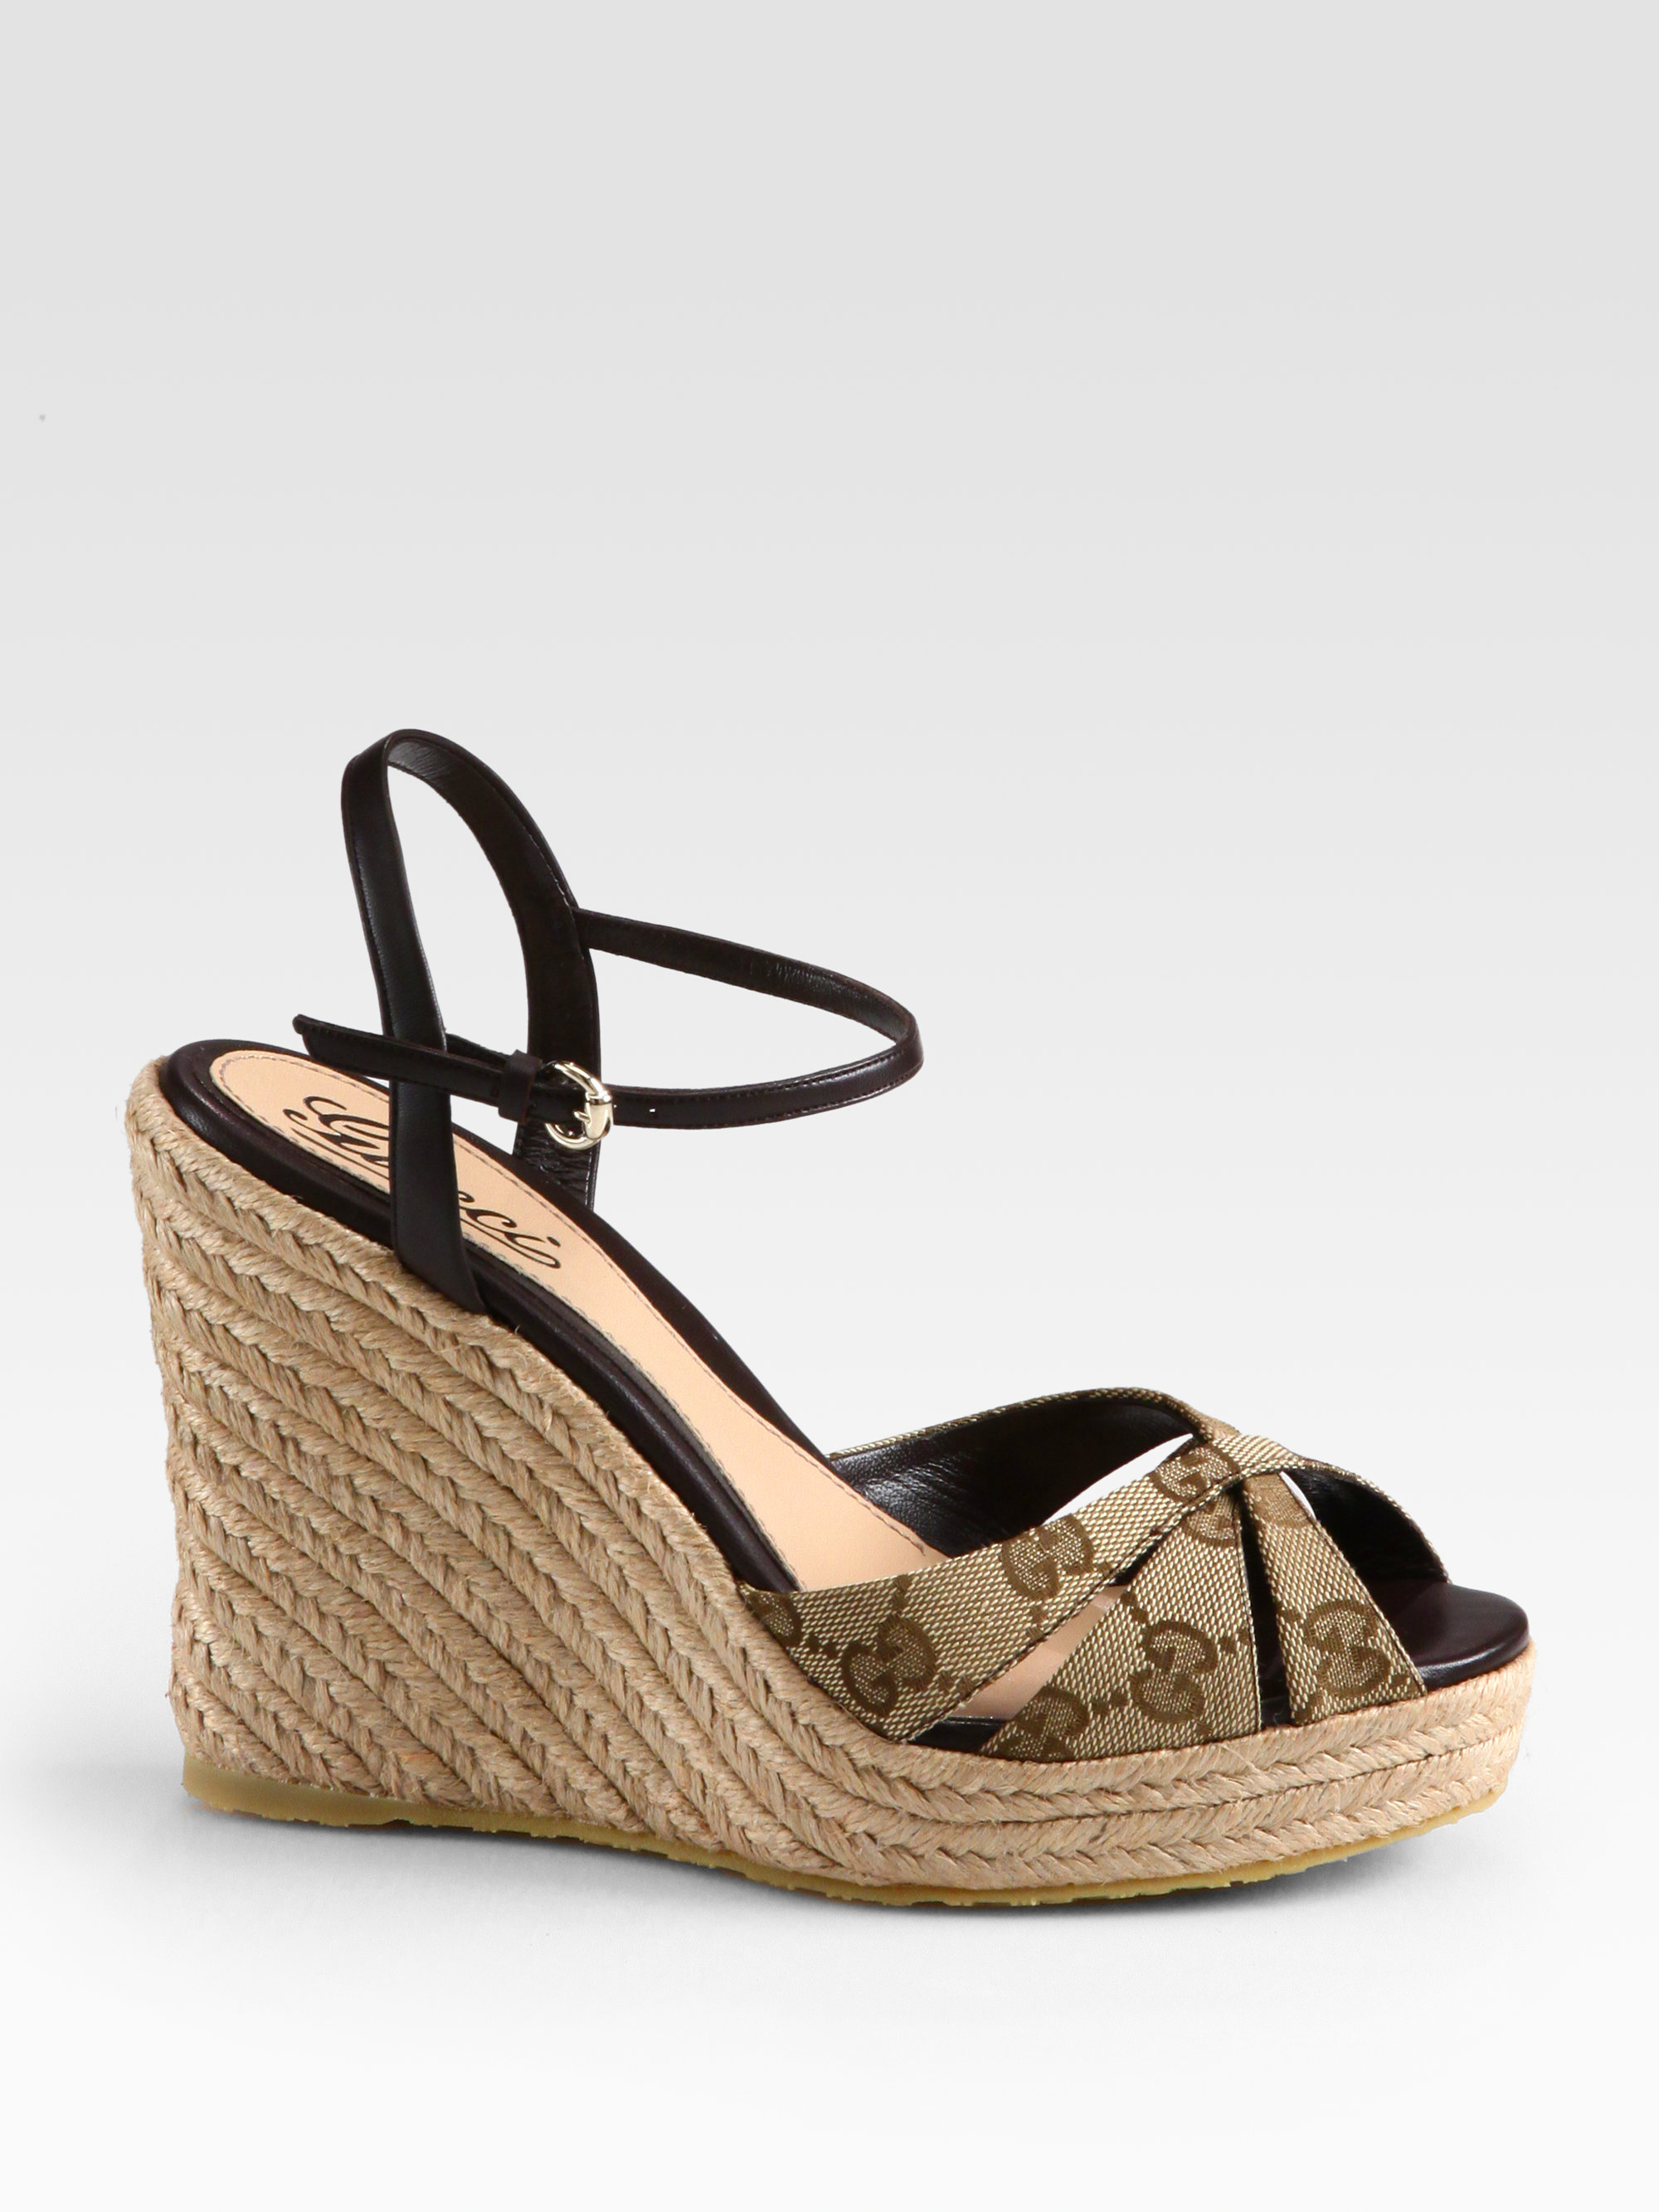 Lyst - Gucci Penelope Gg Canvas Espadrille Wedges in Black